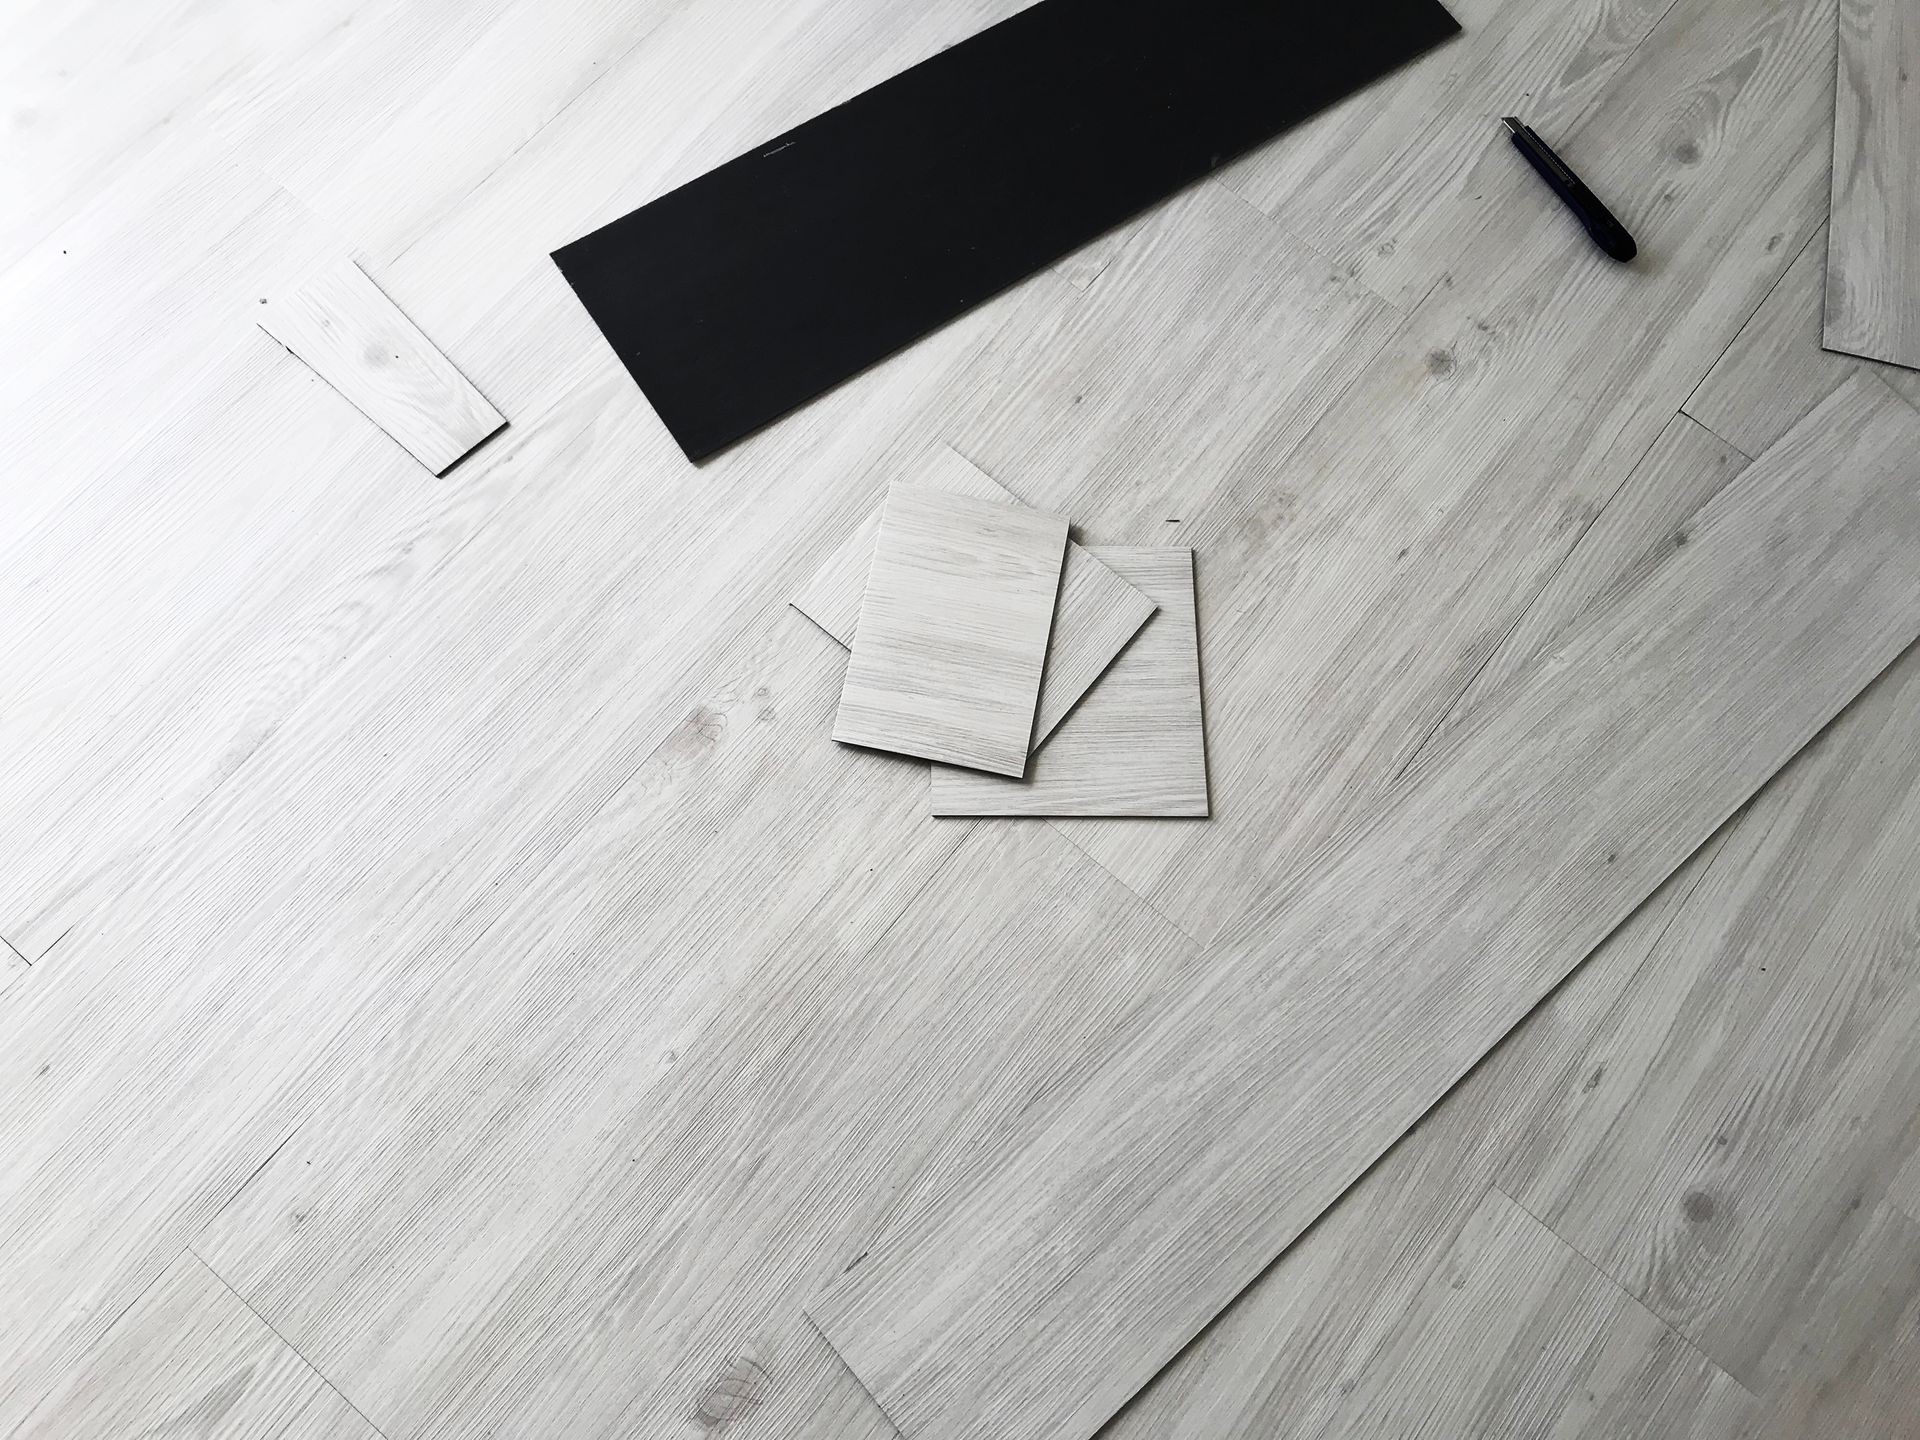 Home renovate. Renovate home floor with glue on base during parquet wood flooring. White Wood vinyl laminate Flooring Installation on parquet background. Material for sweet home.